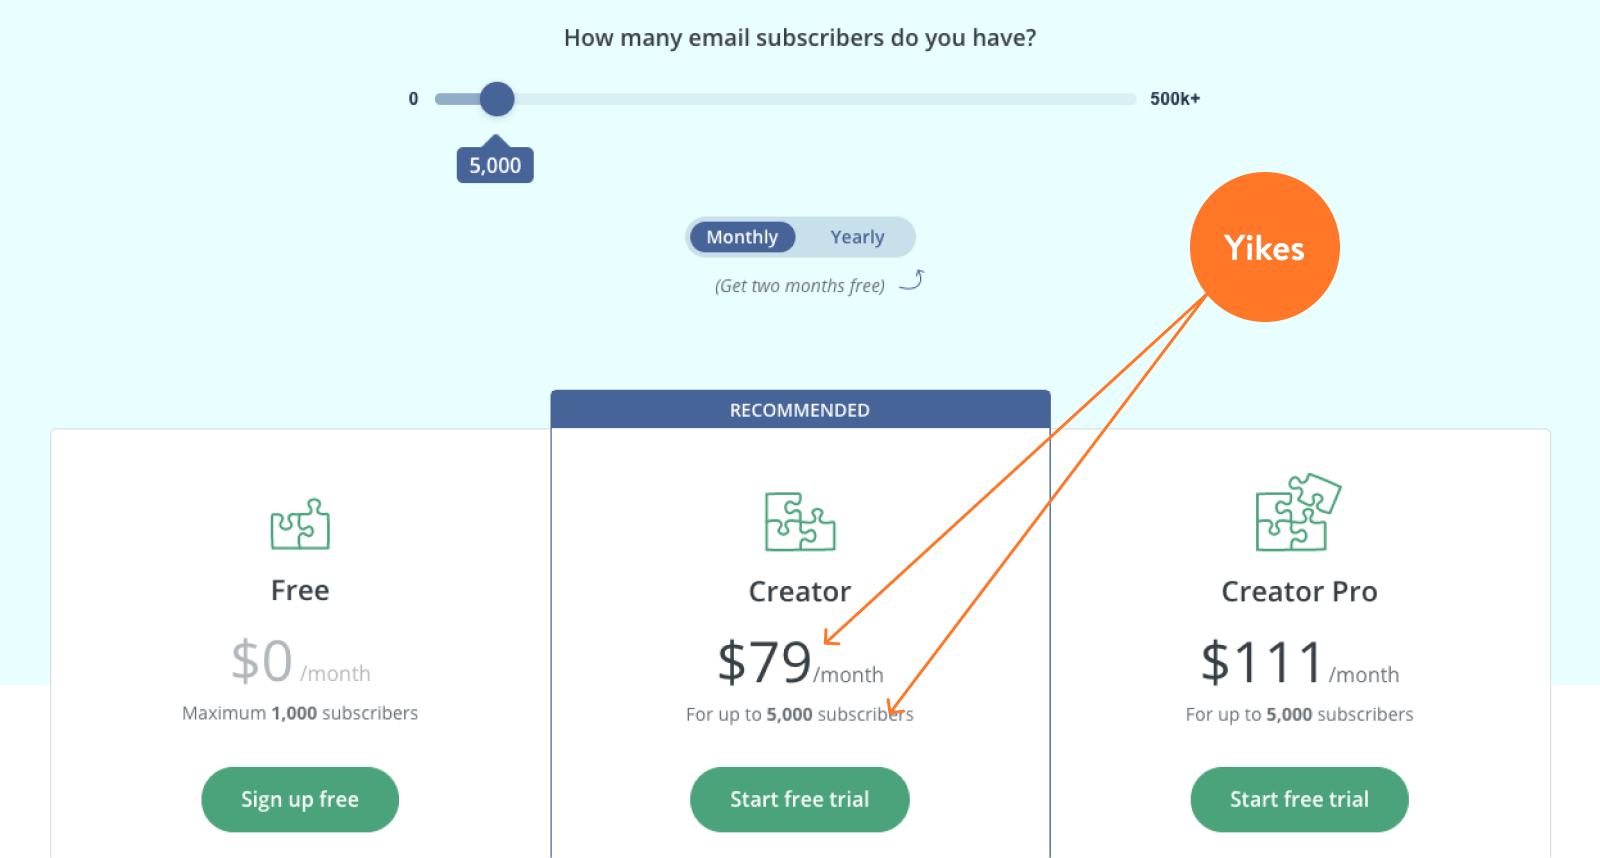 The Thinkific Creator account option is $79/month and limited to 5,000 subscibers